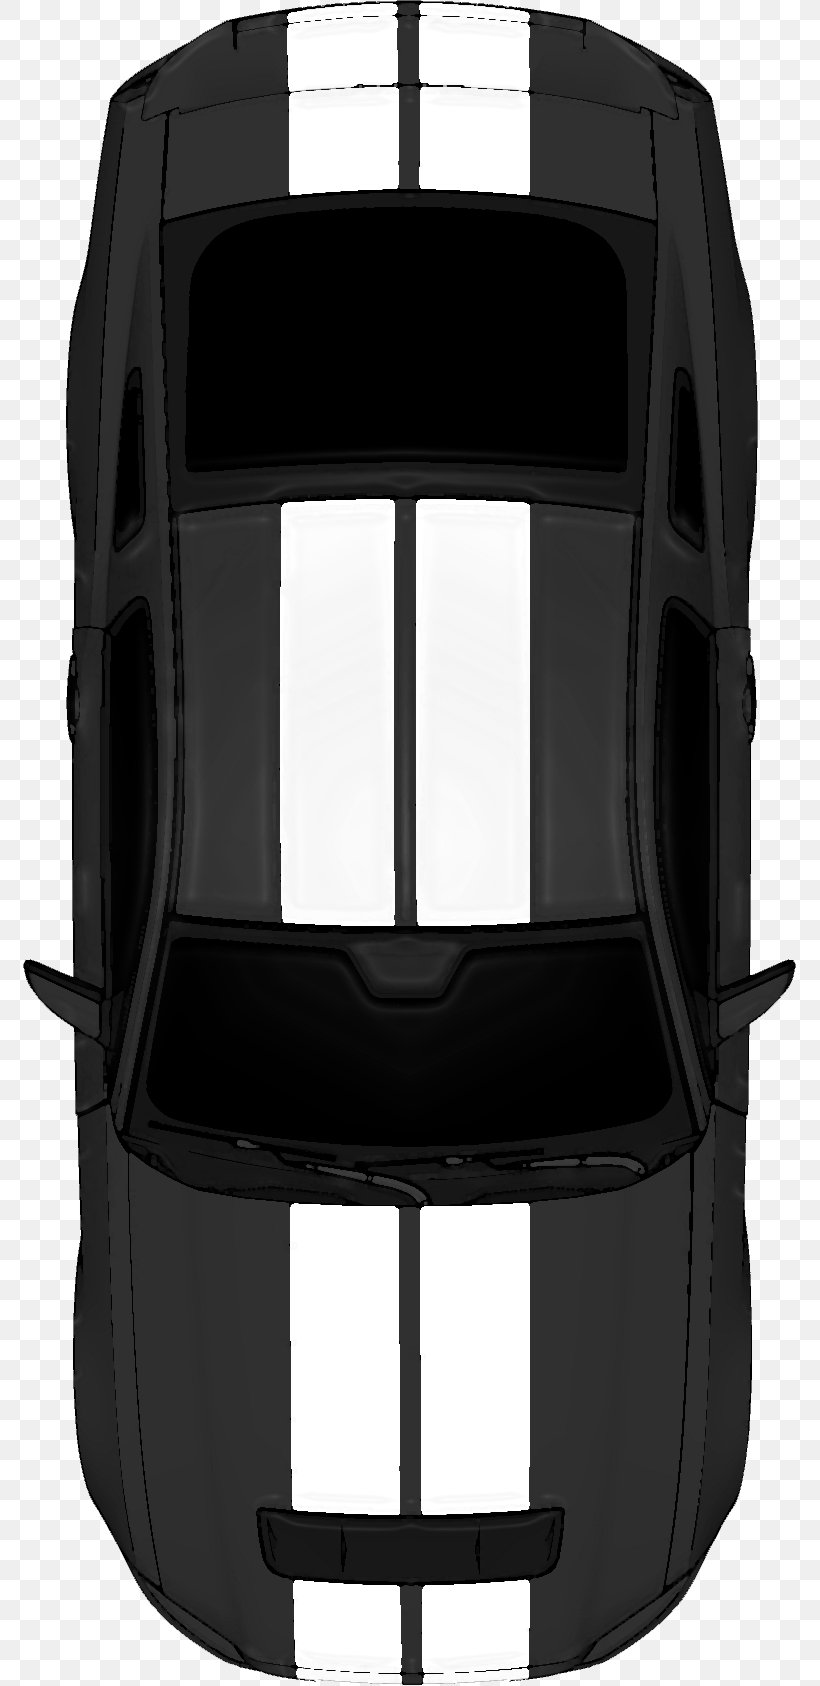 Car Ford Mustang Audi, PNG, 773x1686px, Car, Architecture, Audi, Ford, Ford Mustang Download Free